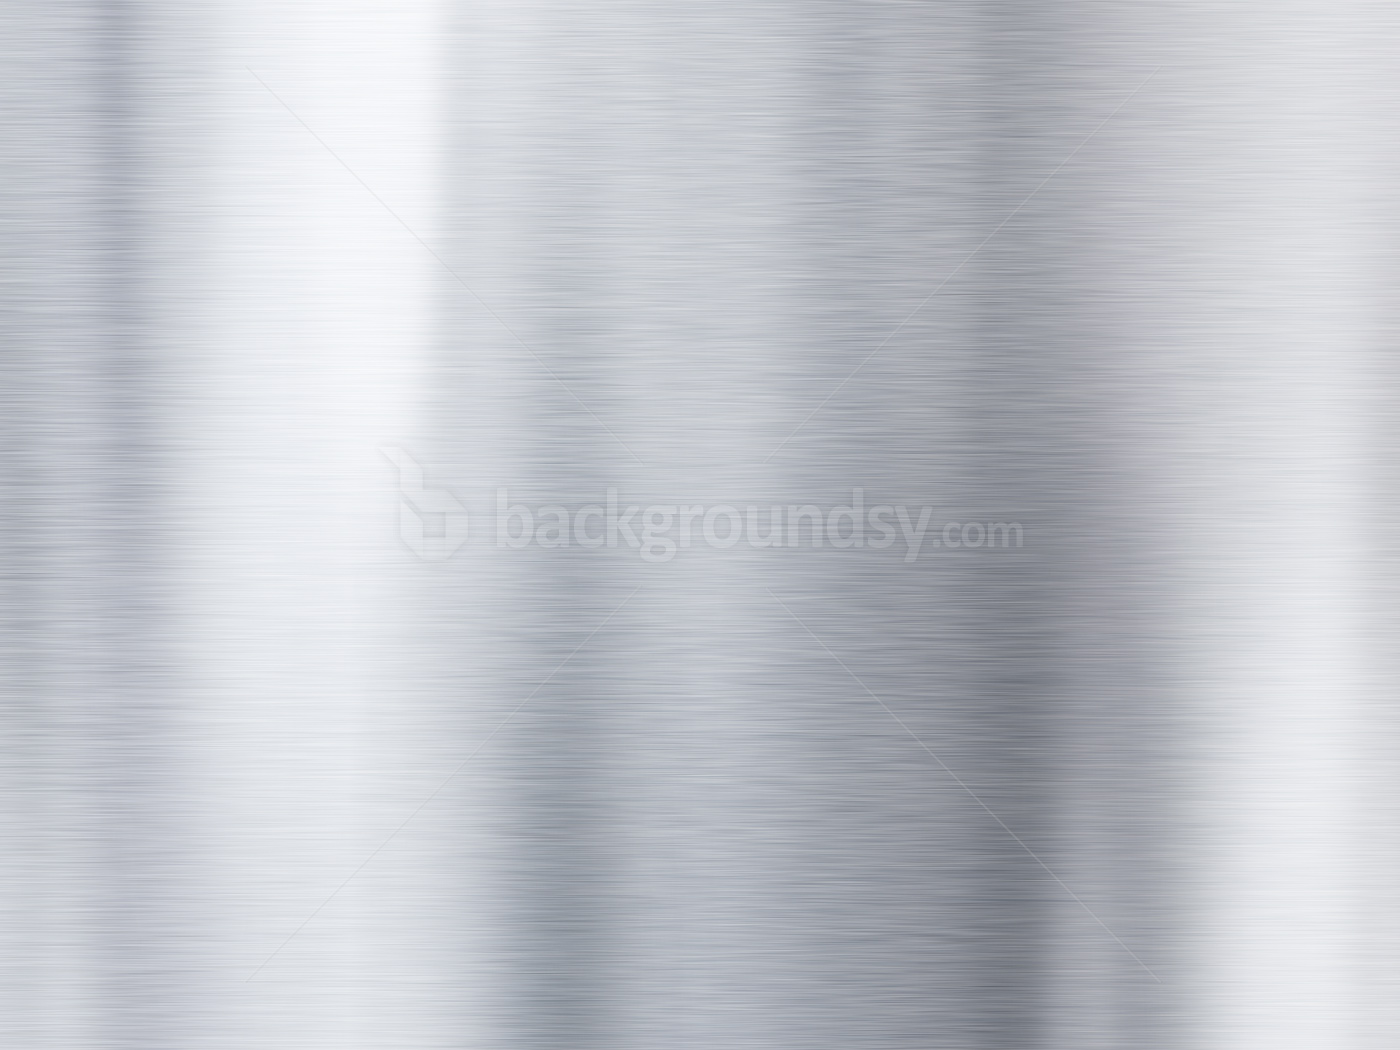 Shiny Metallic Silver Background Images Pictures   Becuo 1400x1050